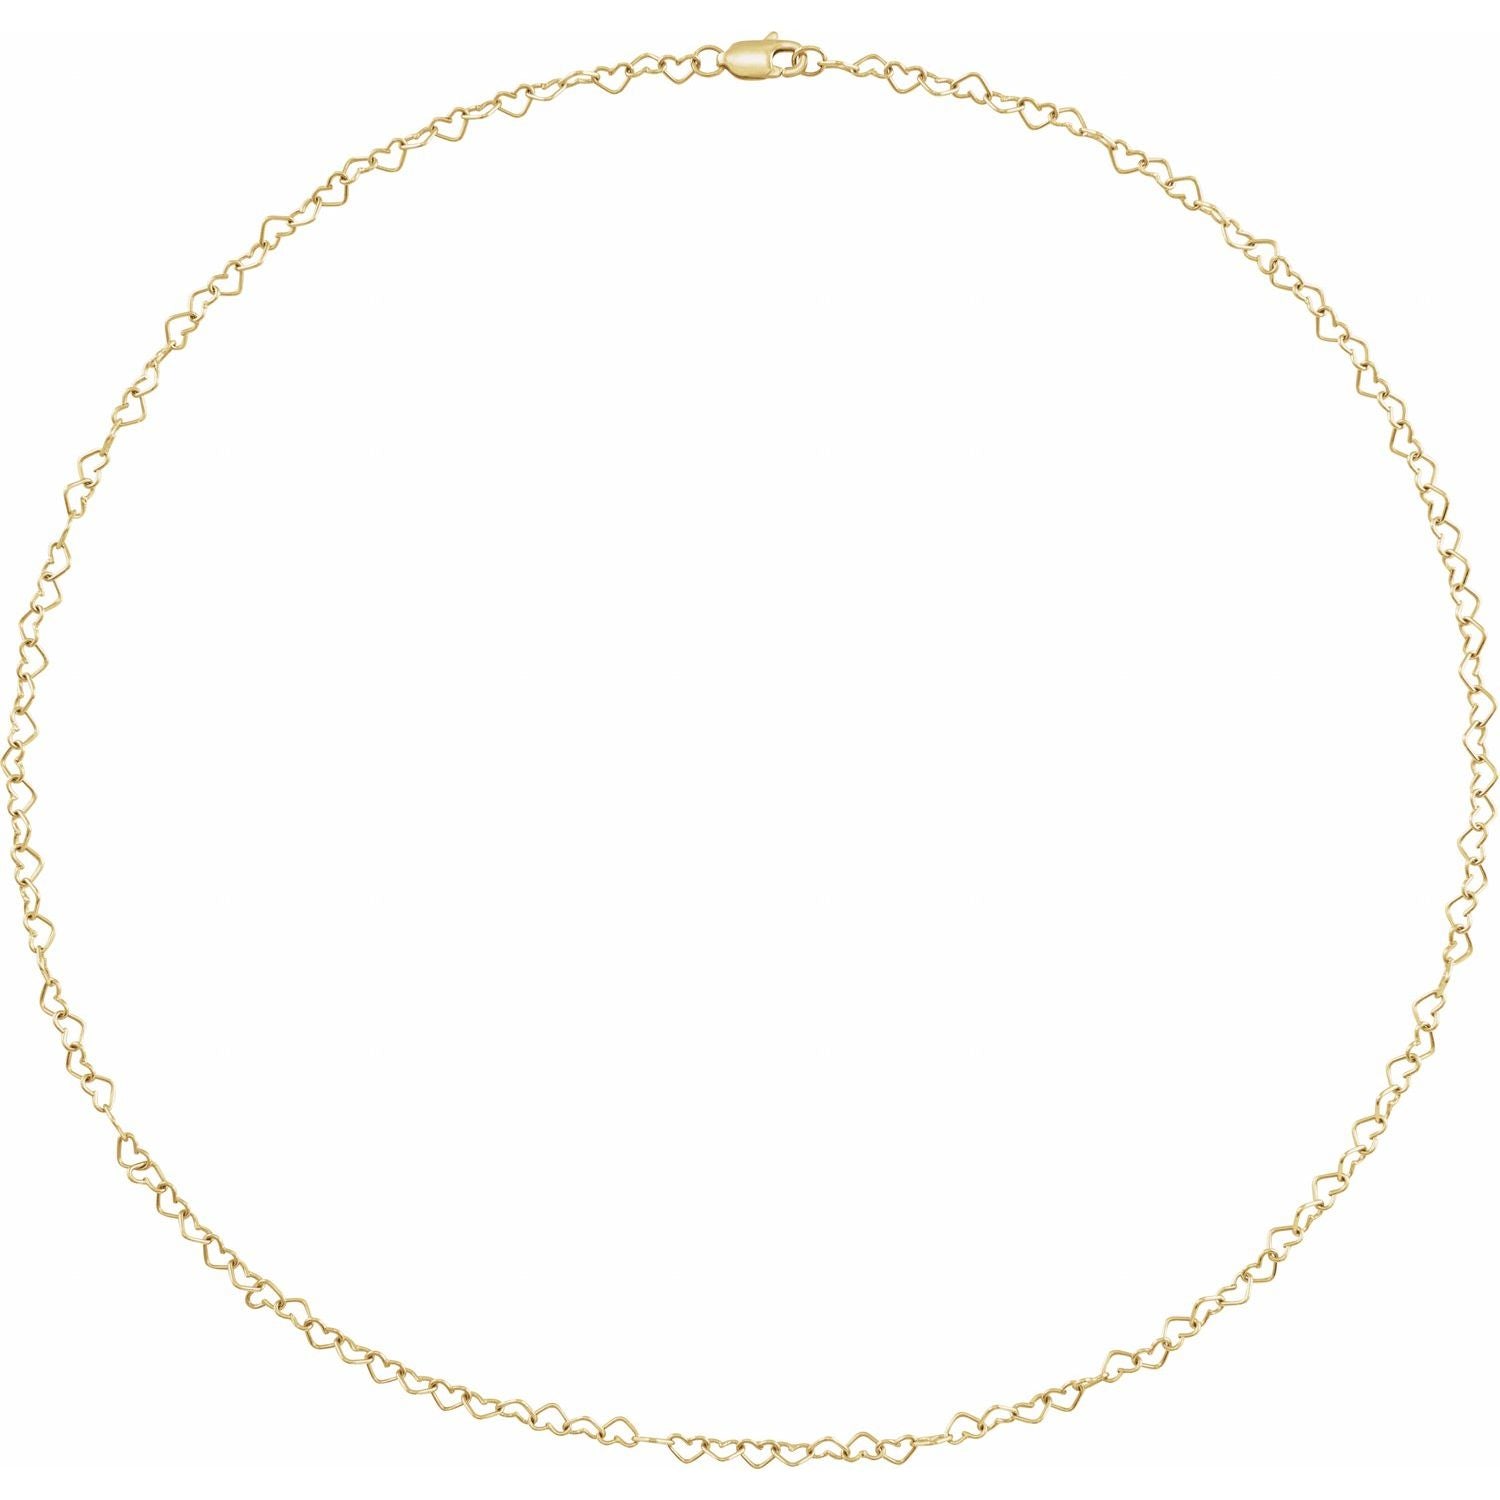 7” 3.2MM HEART CABLE CHAIN WITH LOBSTER CLASP IN 14K WHITE GOLD